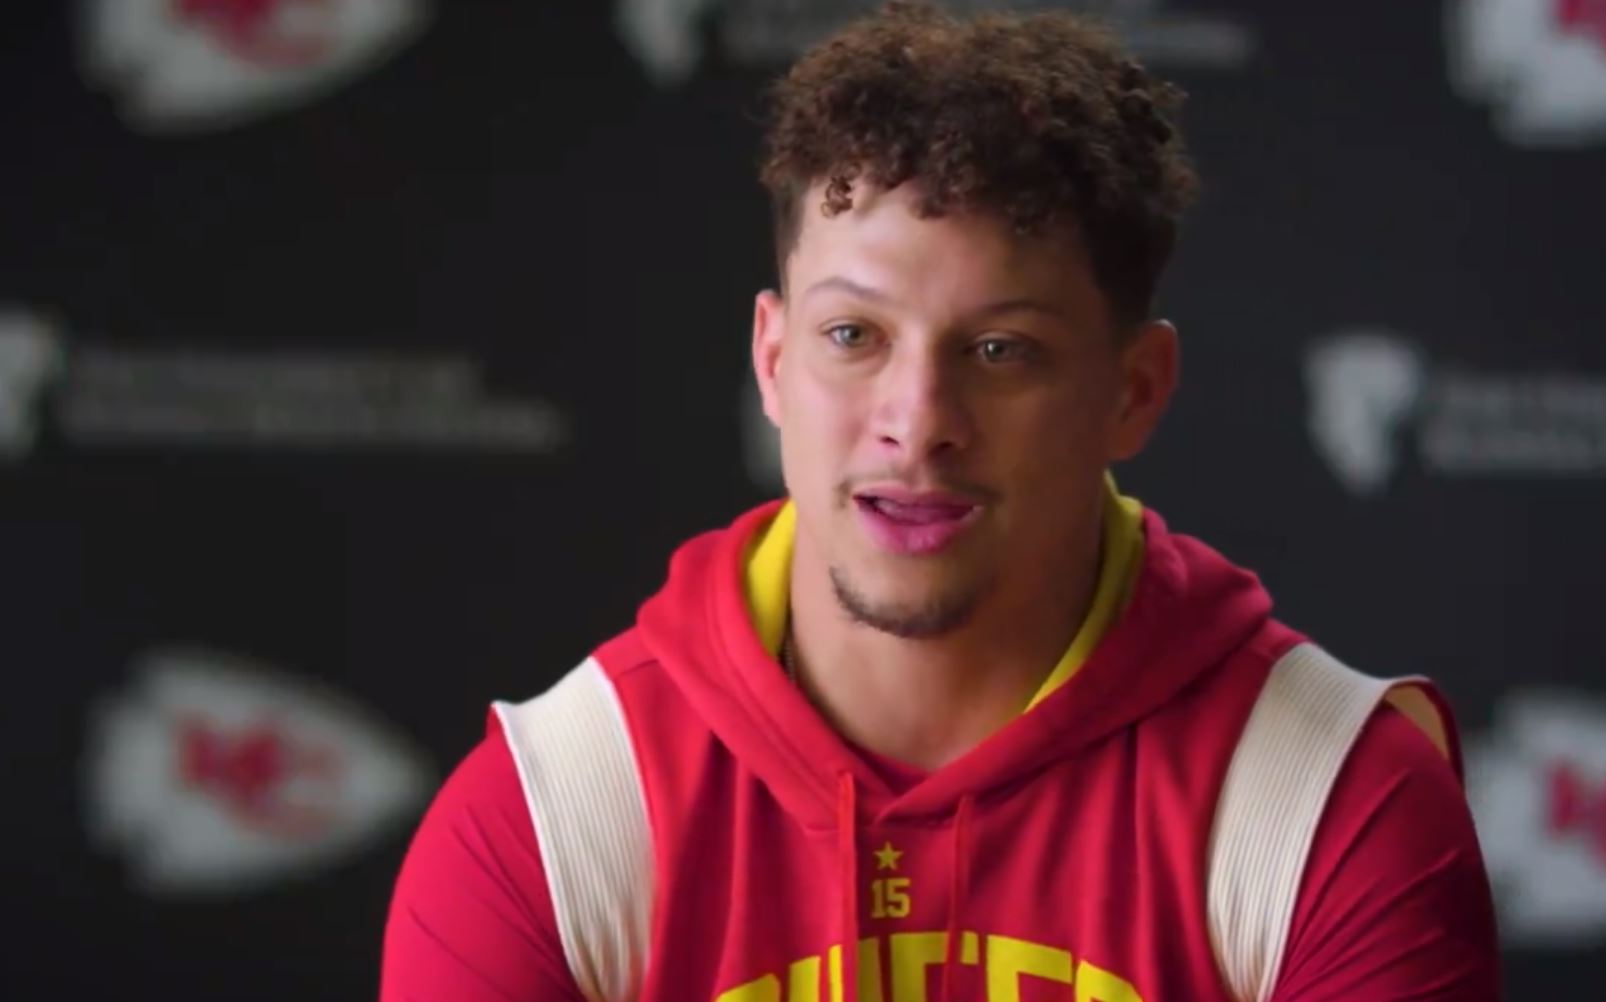 Patrick Mahomes surprised a young fan with a special Christmas gift